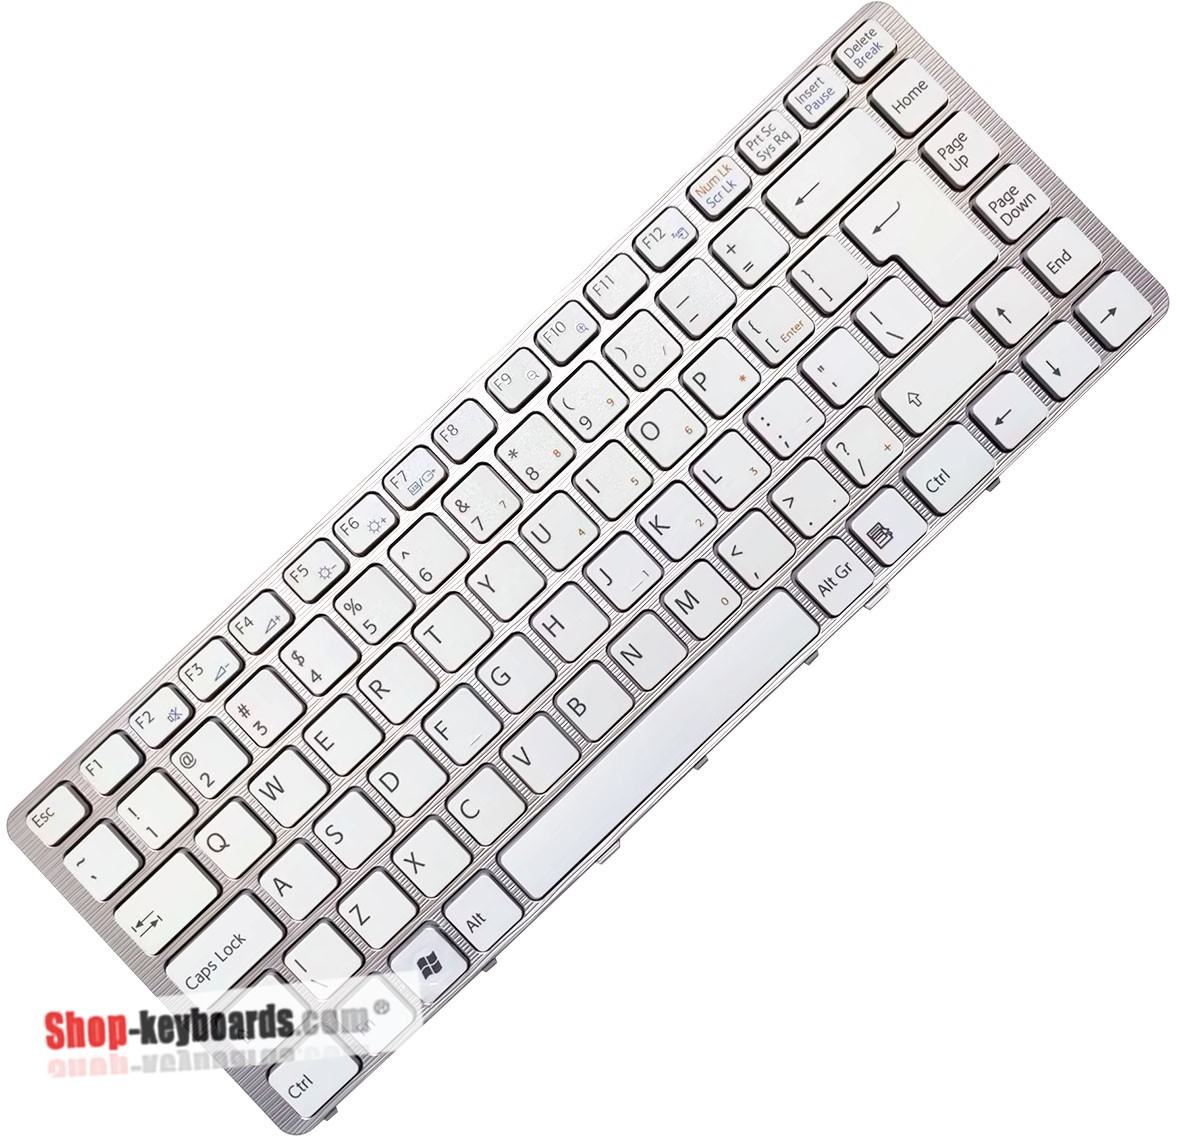 Sony Vaio VGN-NW360F/S  Keyboard replacement